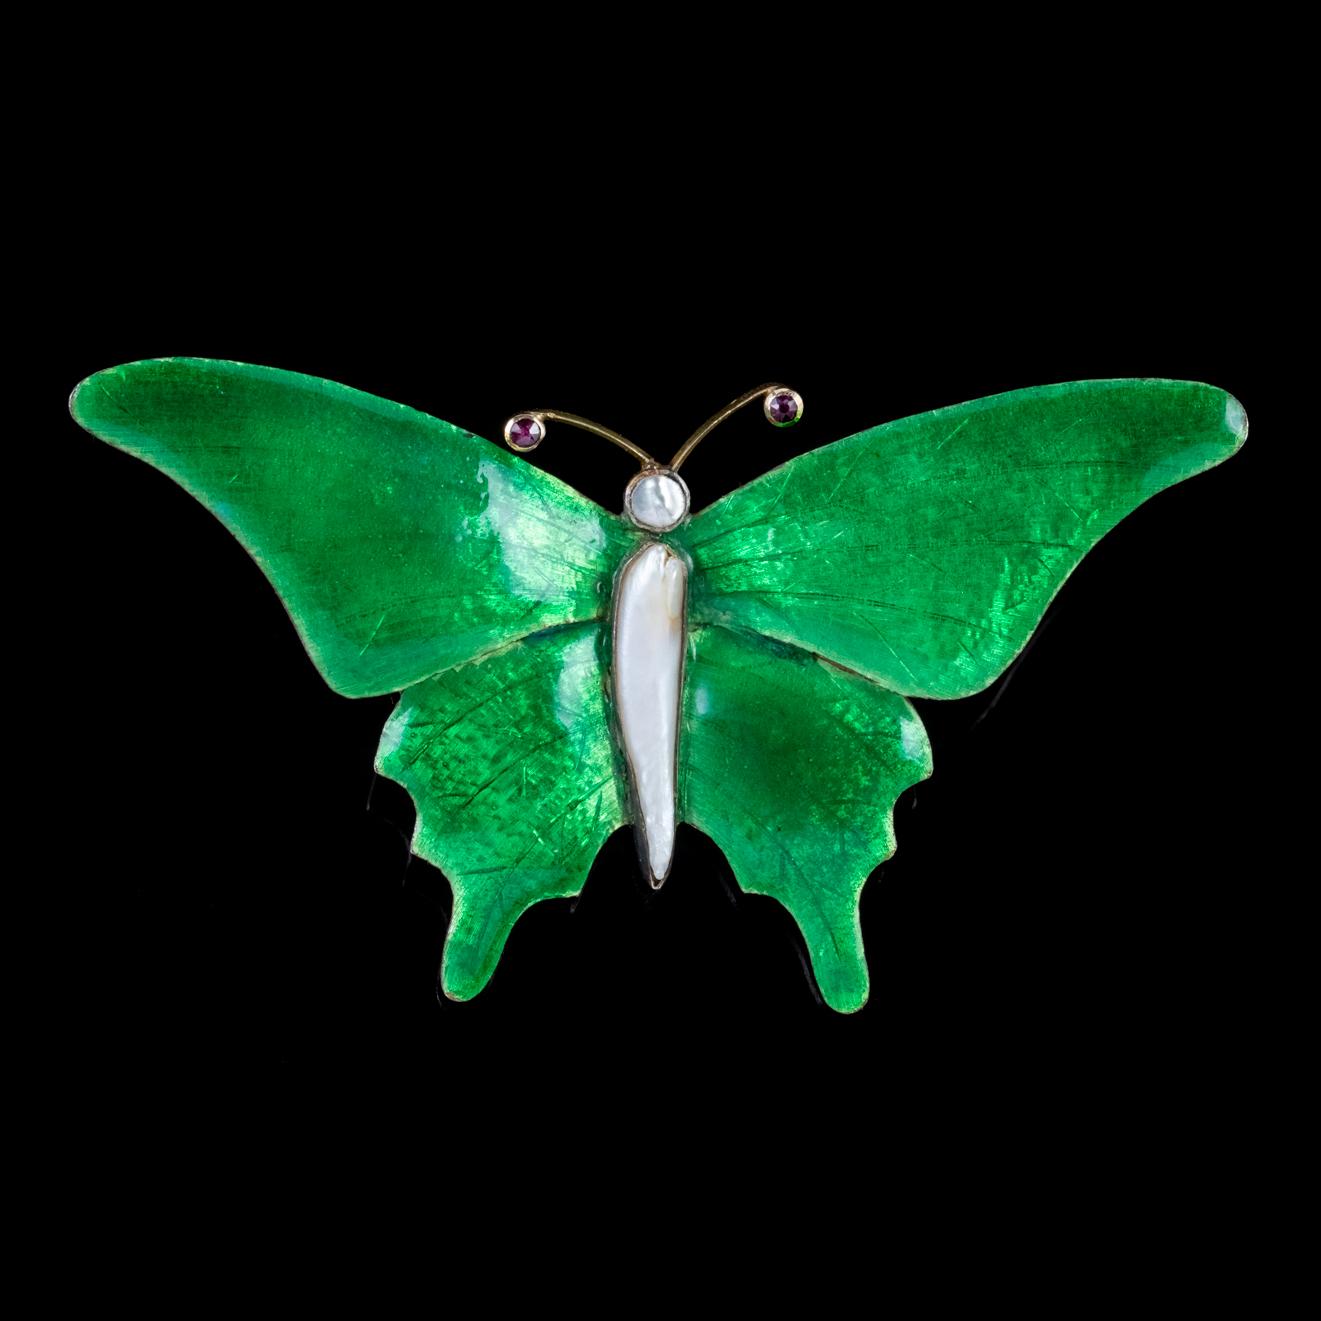 A beautiful antique Victorian butterfly brooch boasting fabulous wings layered in a vibrant green Enamel on the front and a lovely sky-blue underneath. The Enamel work is truly exquisite and has a glimmering metallic texture and fine detailing.